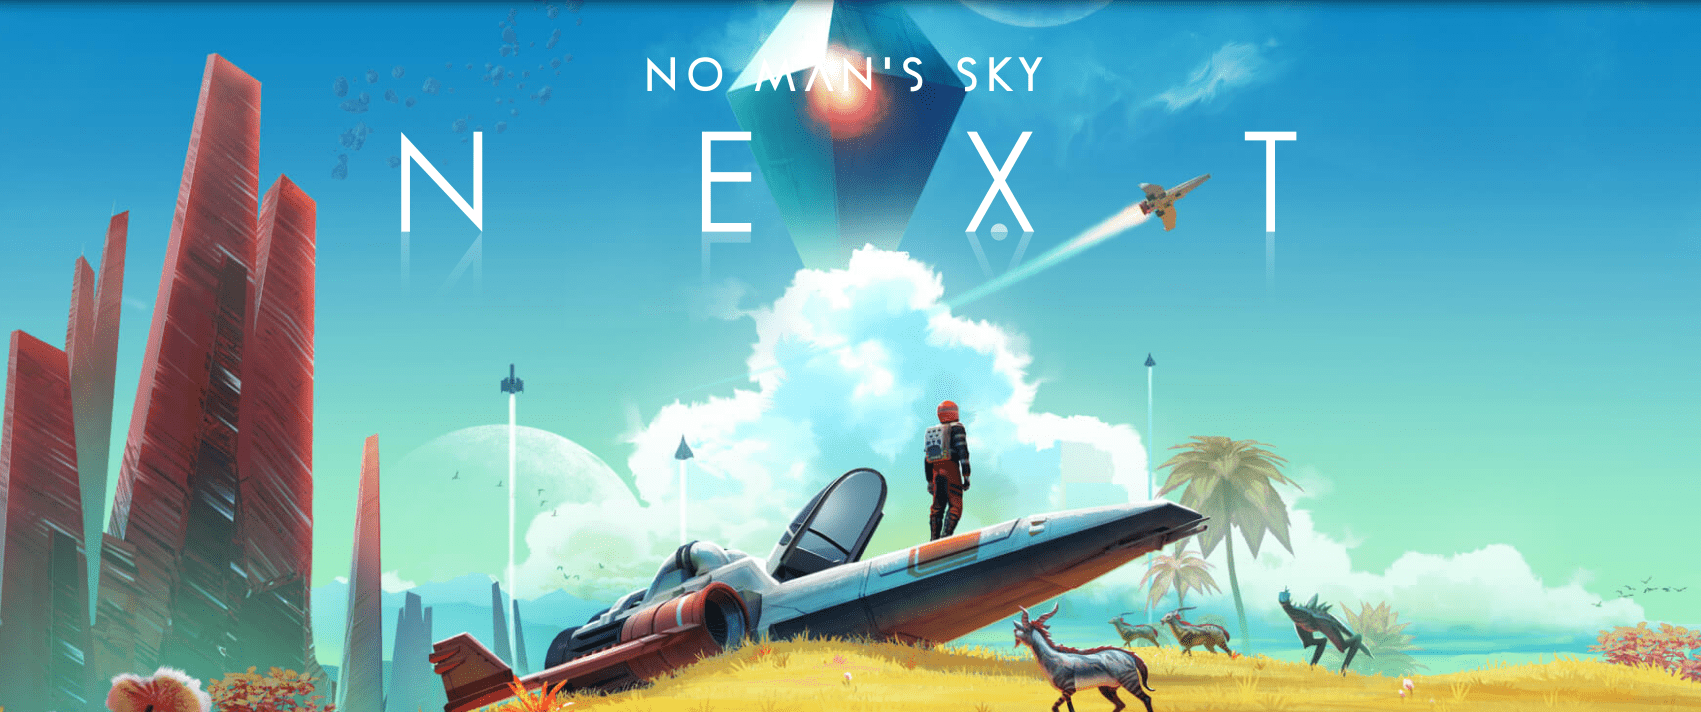 No Man’s Sky NEXT coming to Xbox One